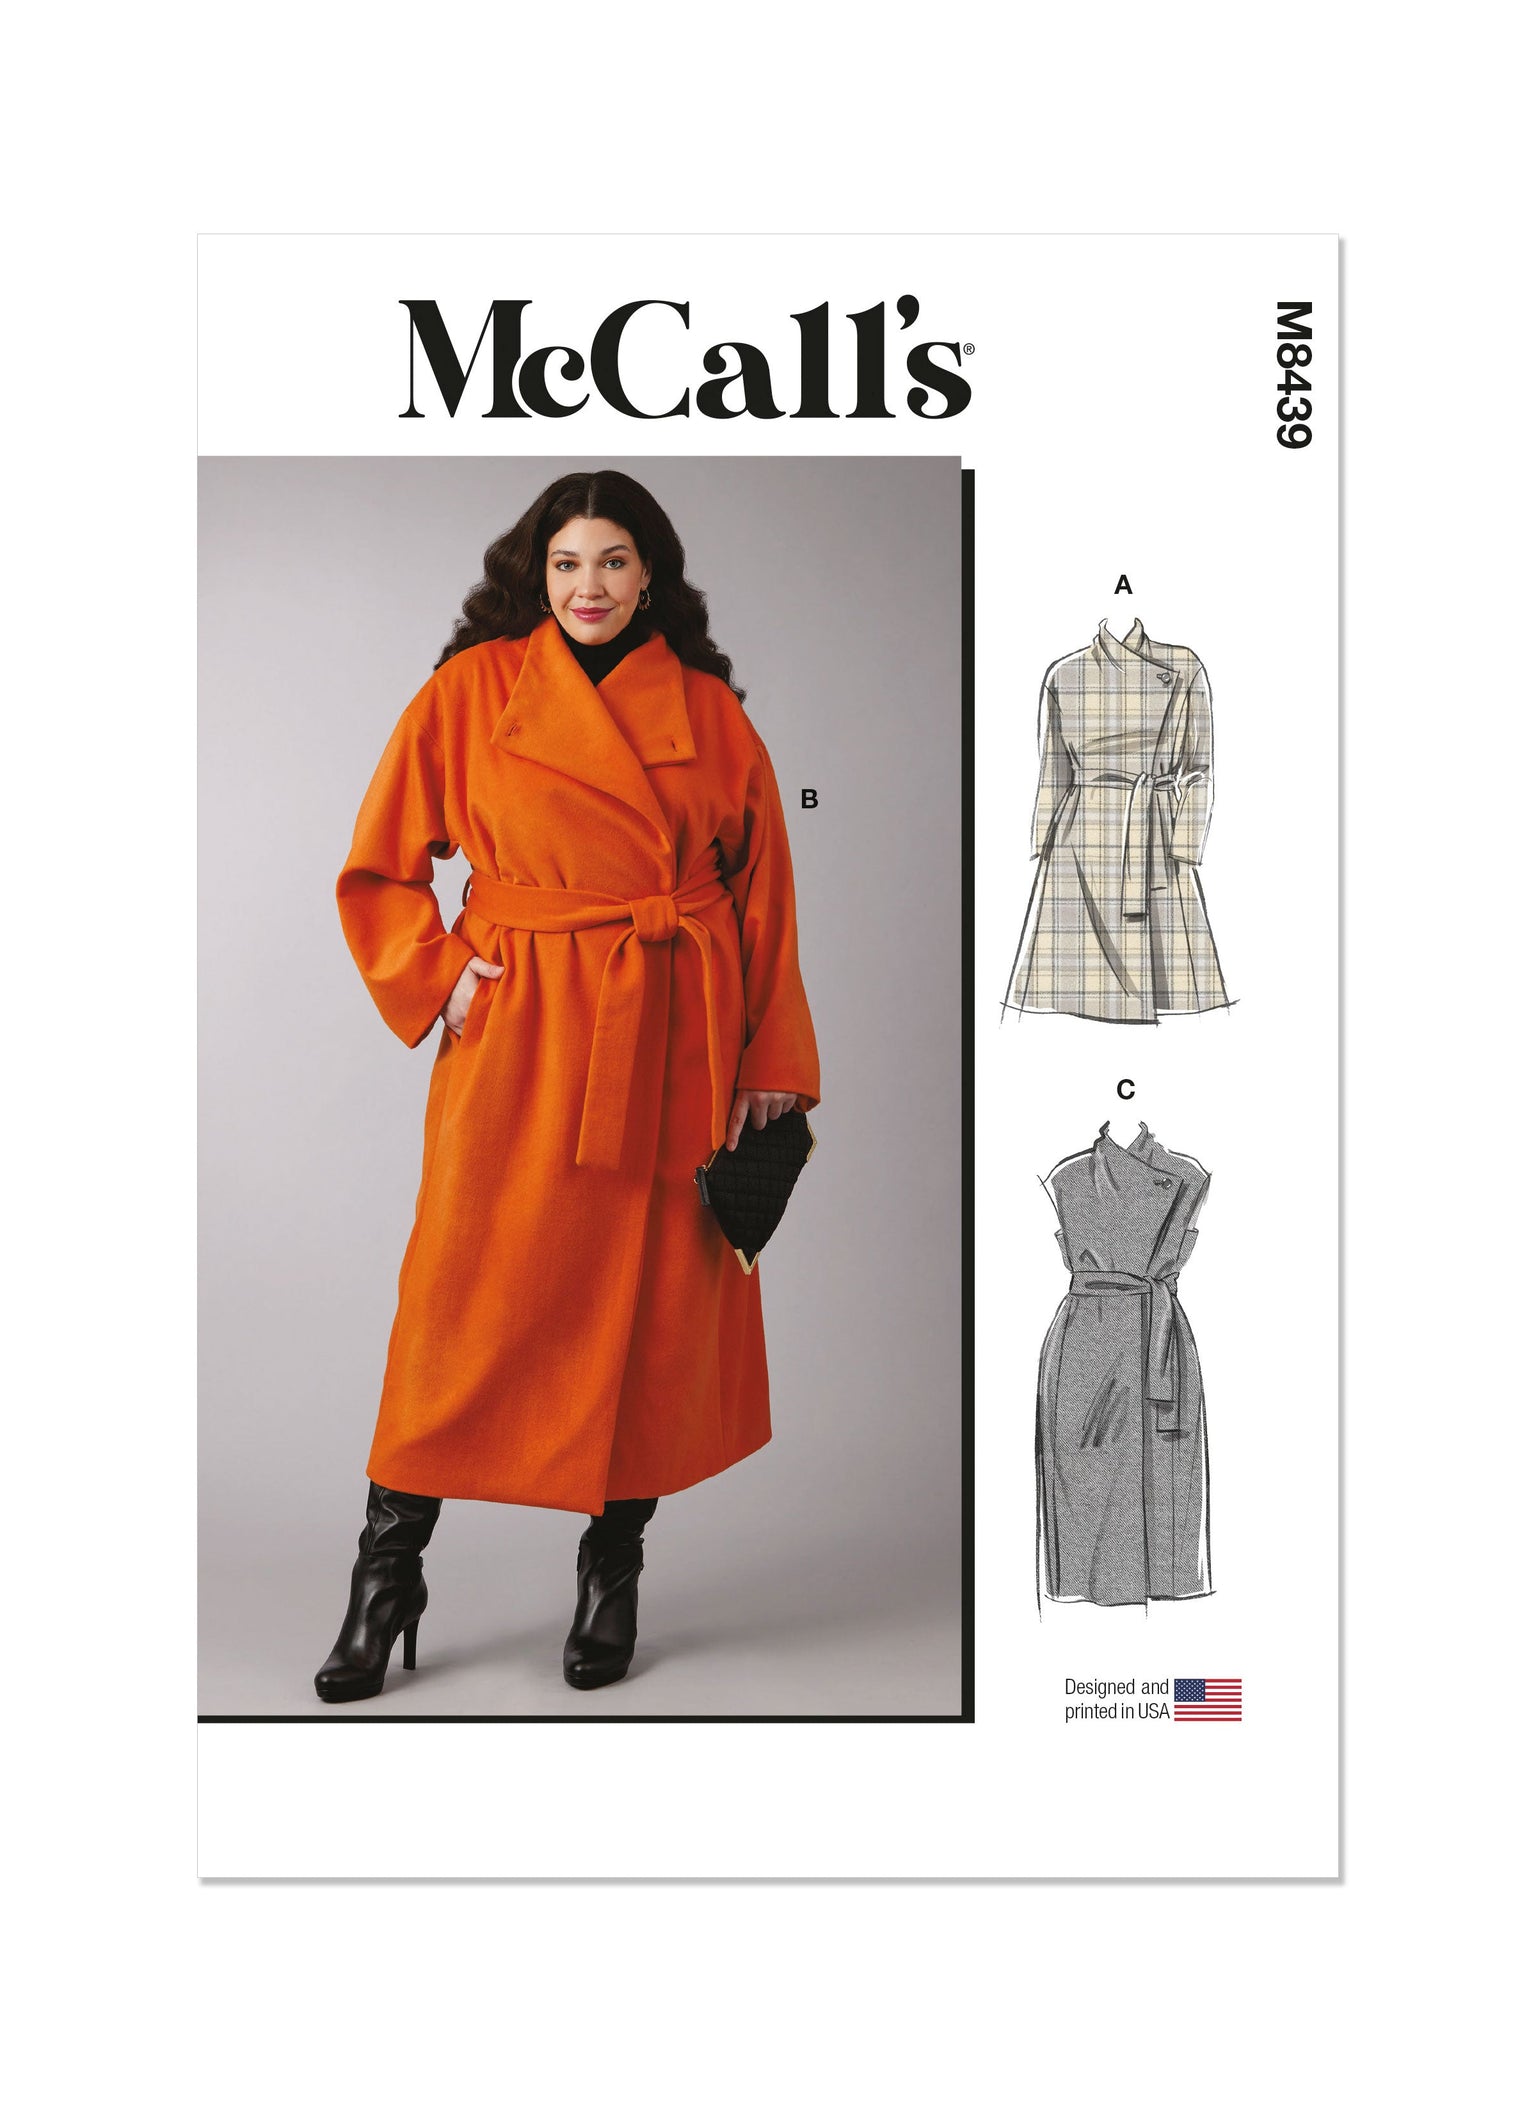 McCall's Sewing Patterns — jaycotts.co.uk - Sewing Supplies